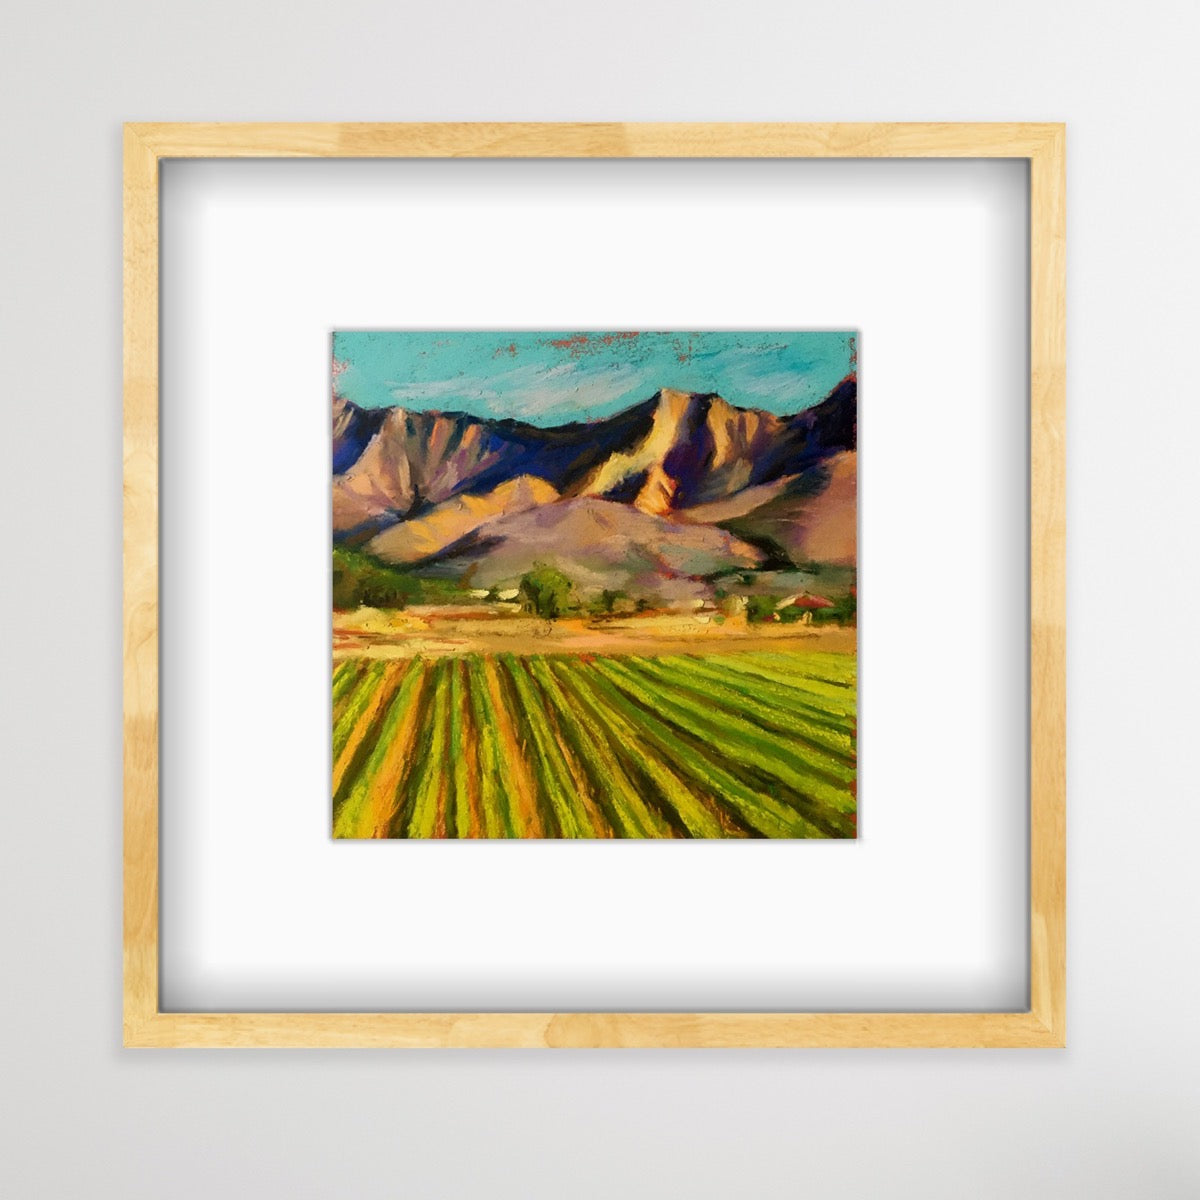 FLOWER FIELDS  |  SOUTH MOUNTAIN - Giclee Reproduction Print of Original Pastel Painting